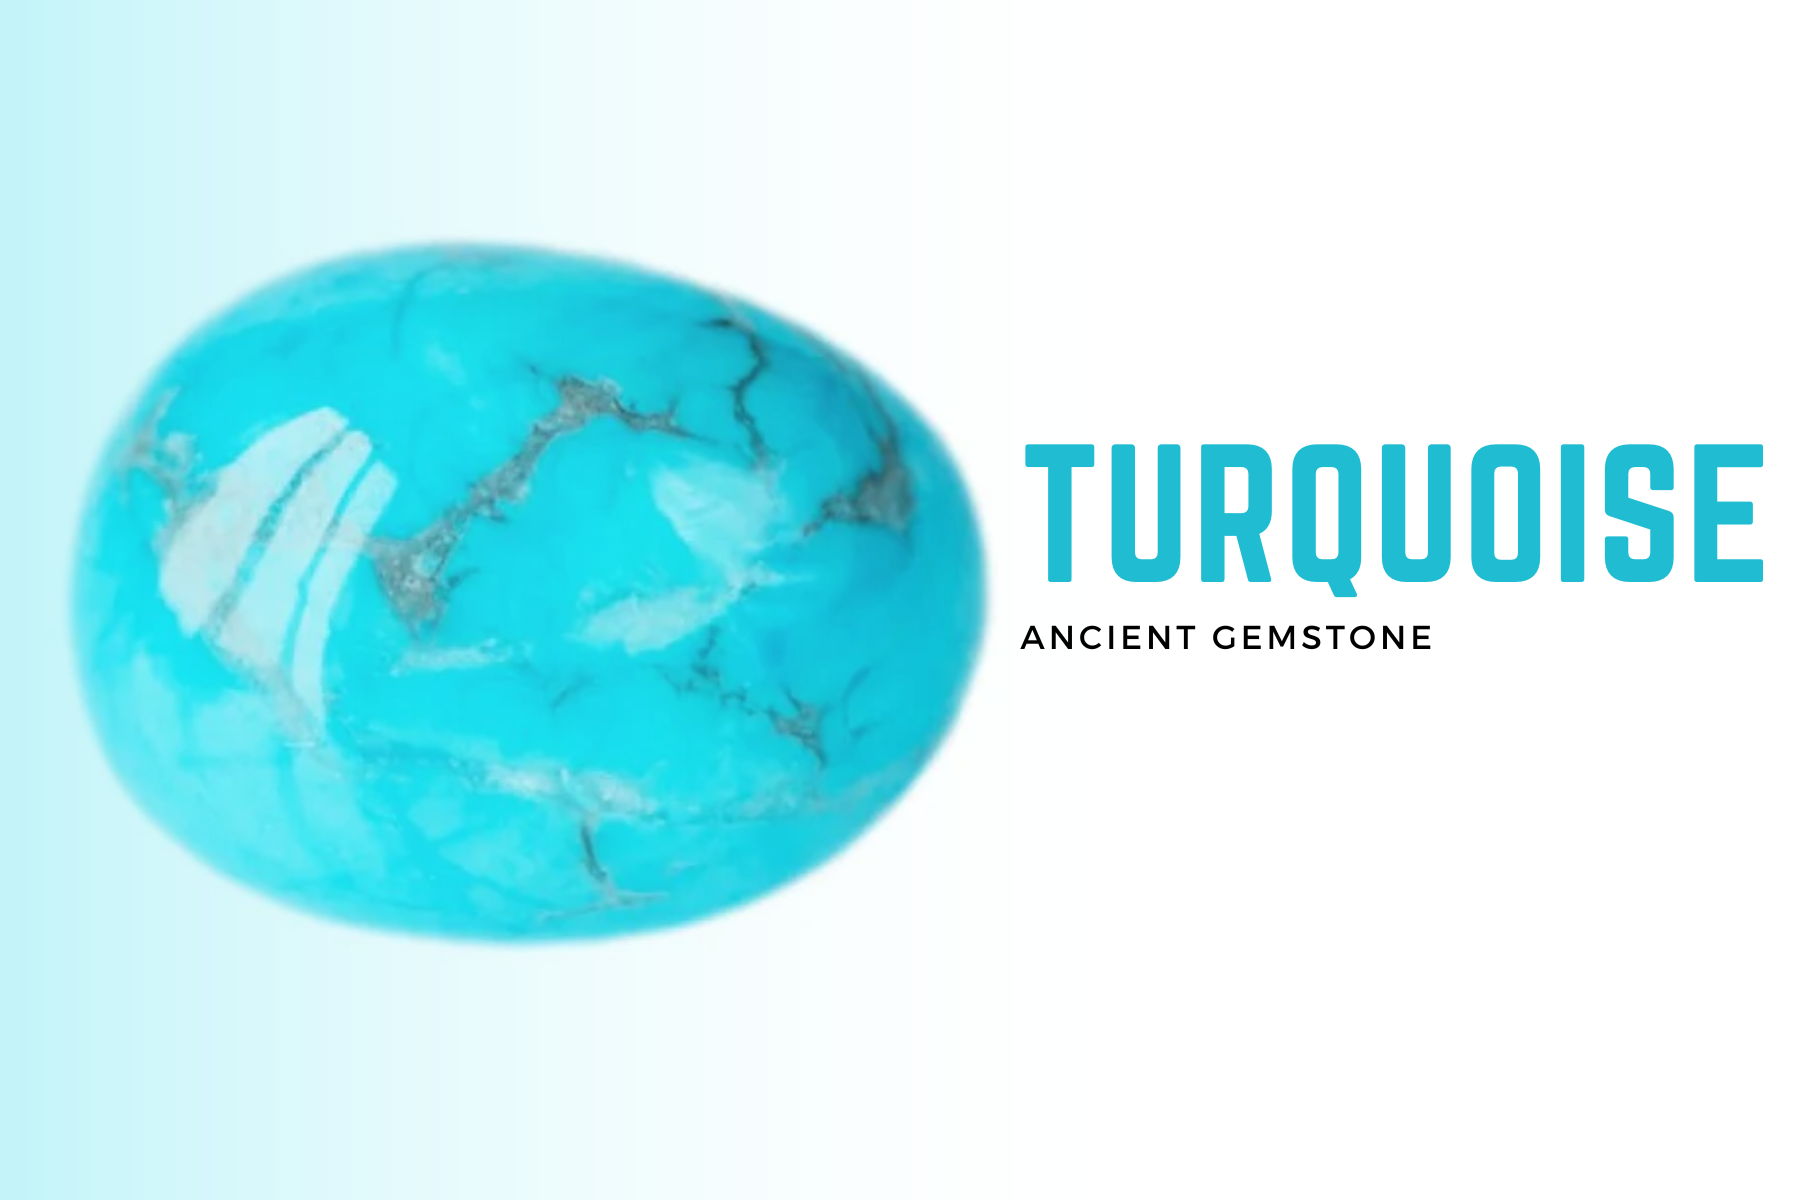 Rock-formed turquoise stone